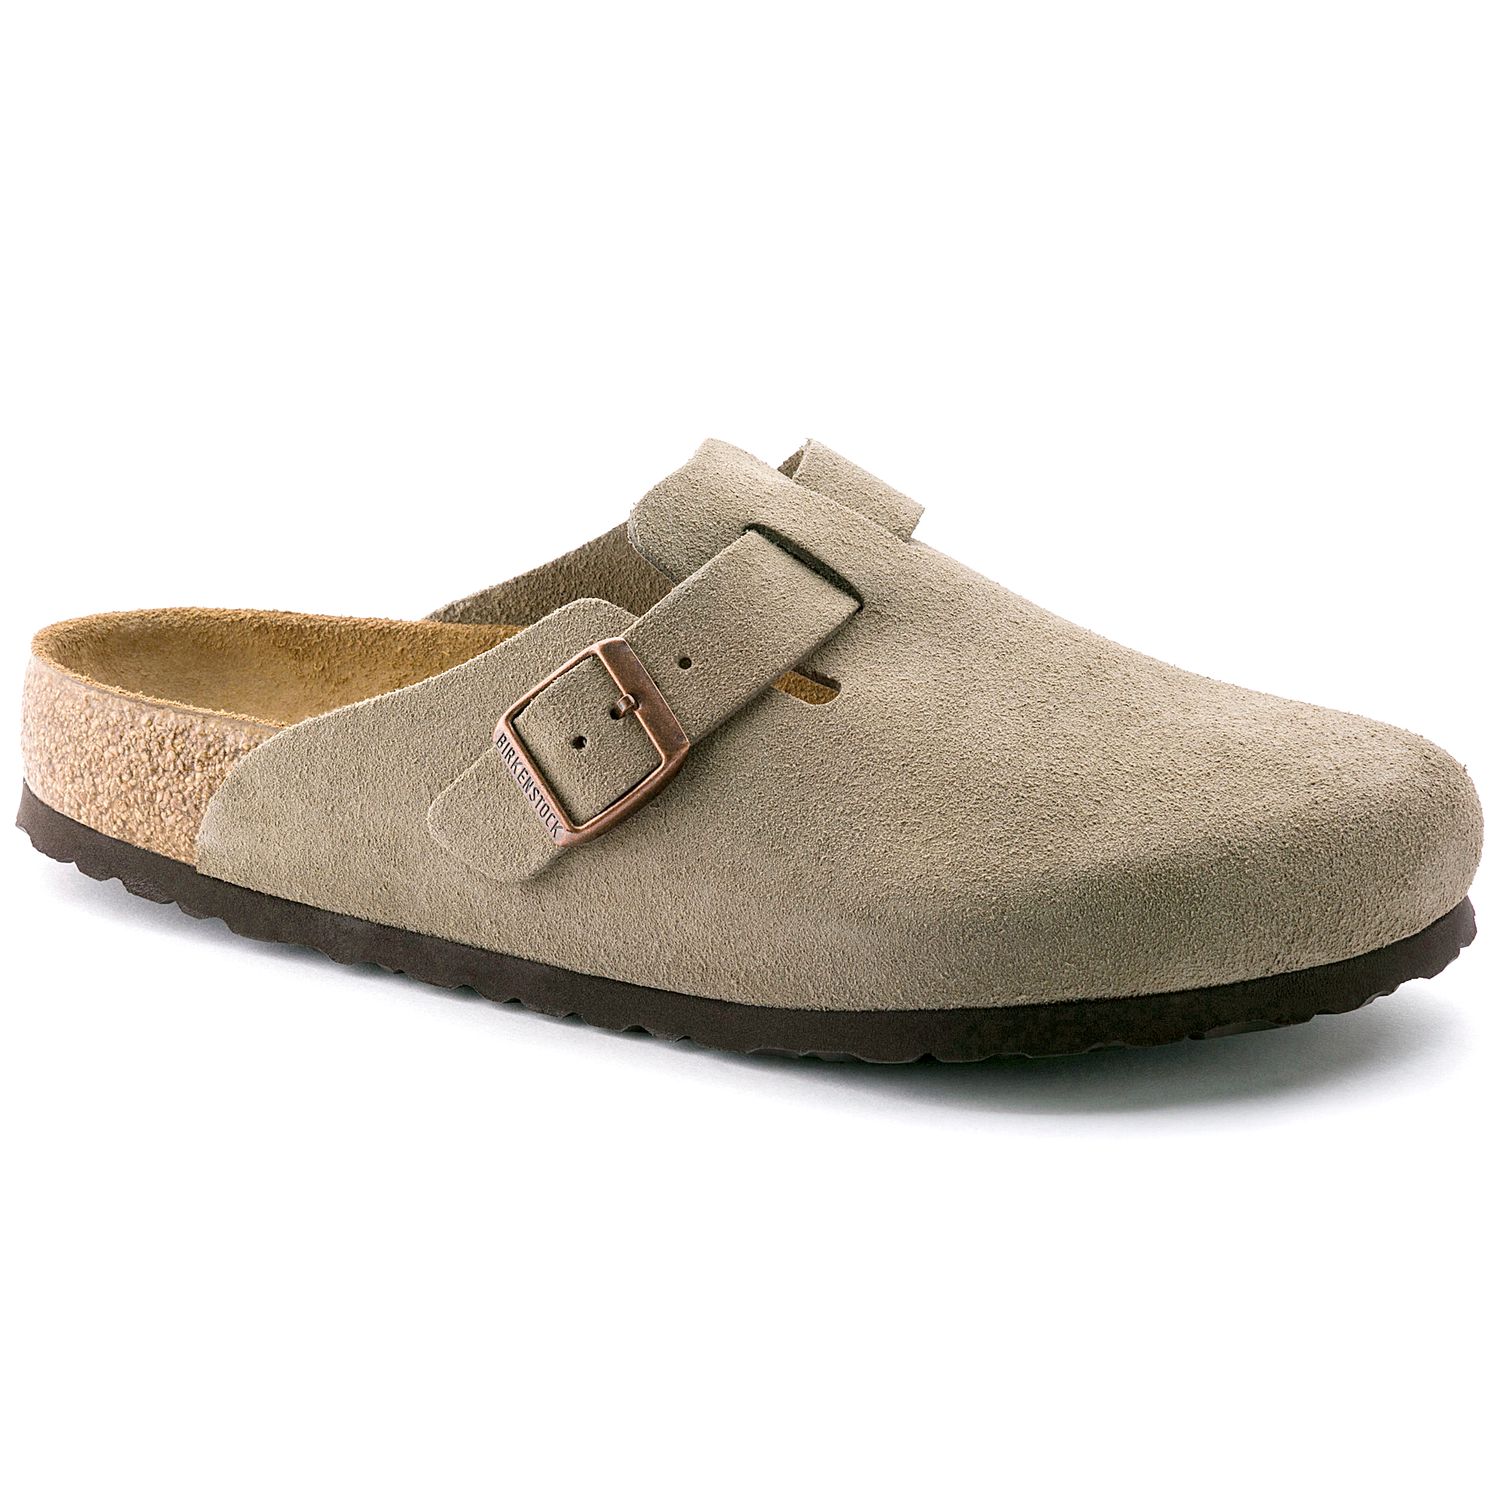 Boston Soft Footbed Suede, Color: Taupe, Size: 38R